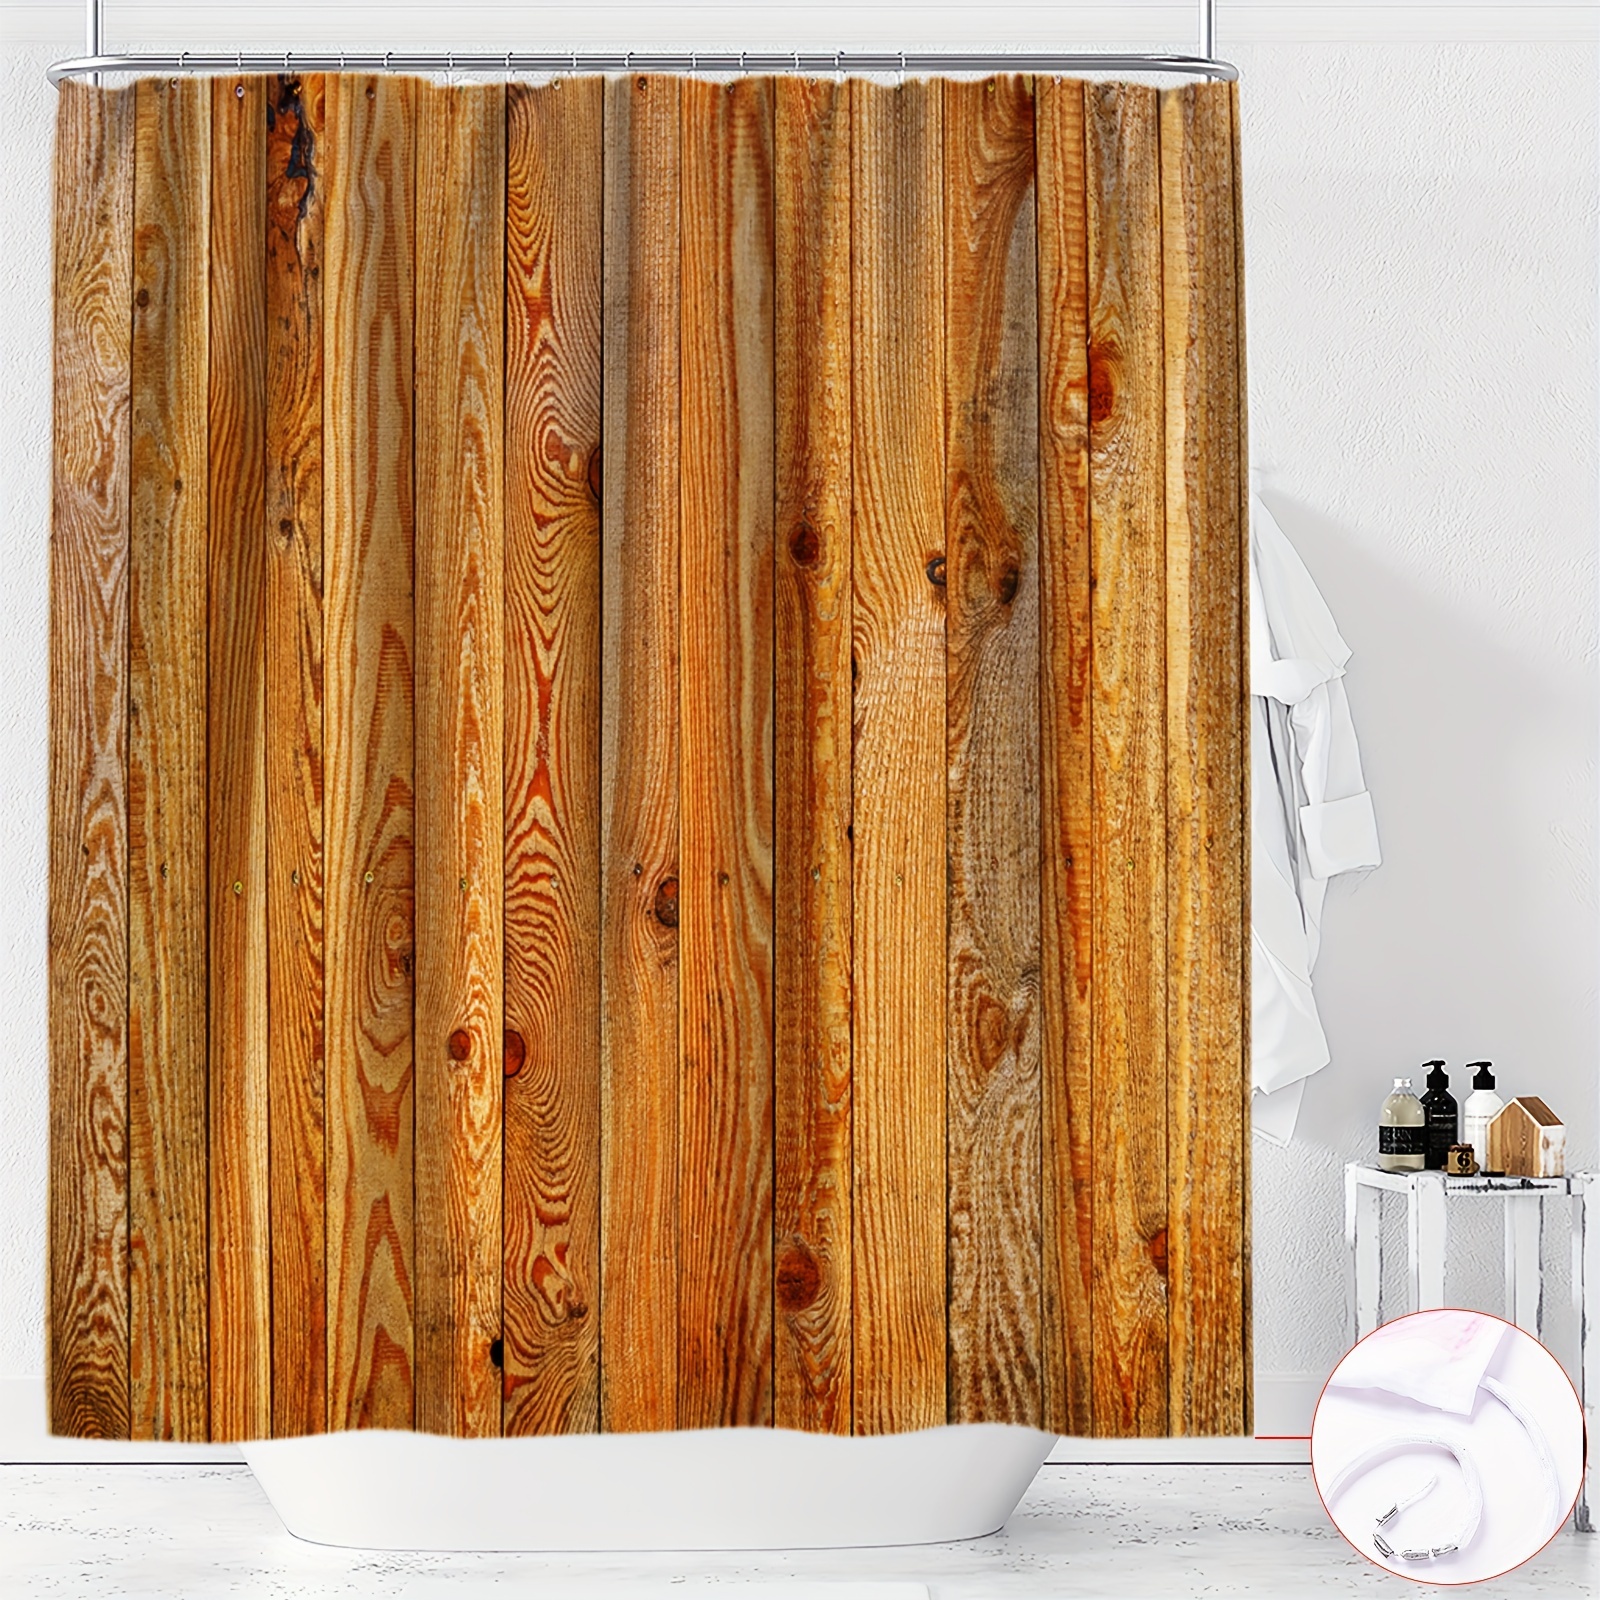 

Ywjhui Water-resistant Polyester Shower Curtain With Rustic Wood Plank Digital Print - Machine Washable, Includes Hooks, Knit Weave, Partially Lined, Artistic Home Bathroom Decor, For All Seasons